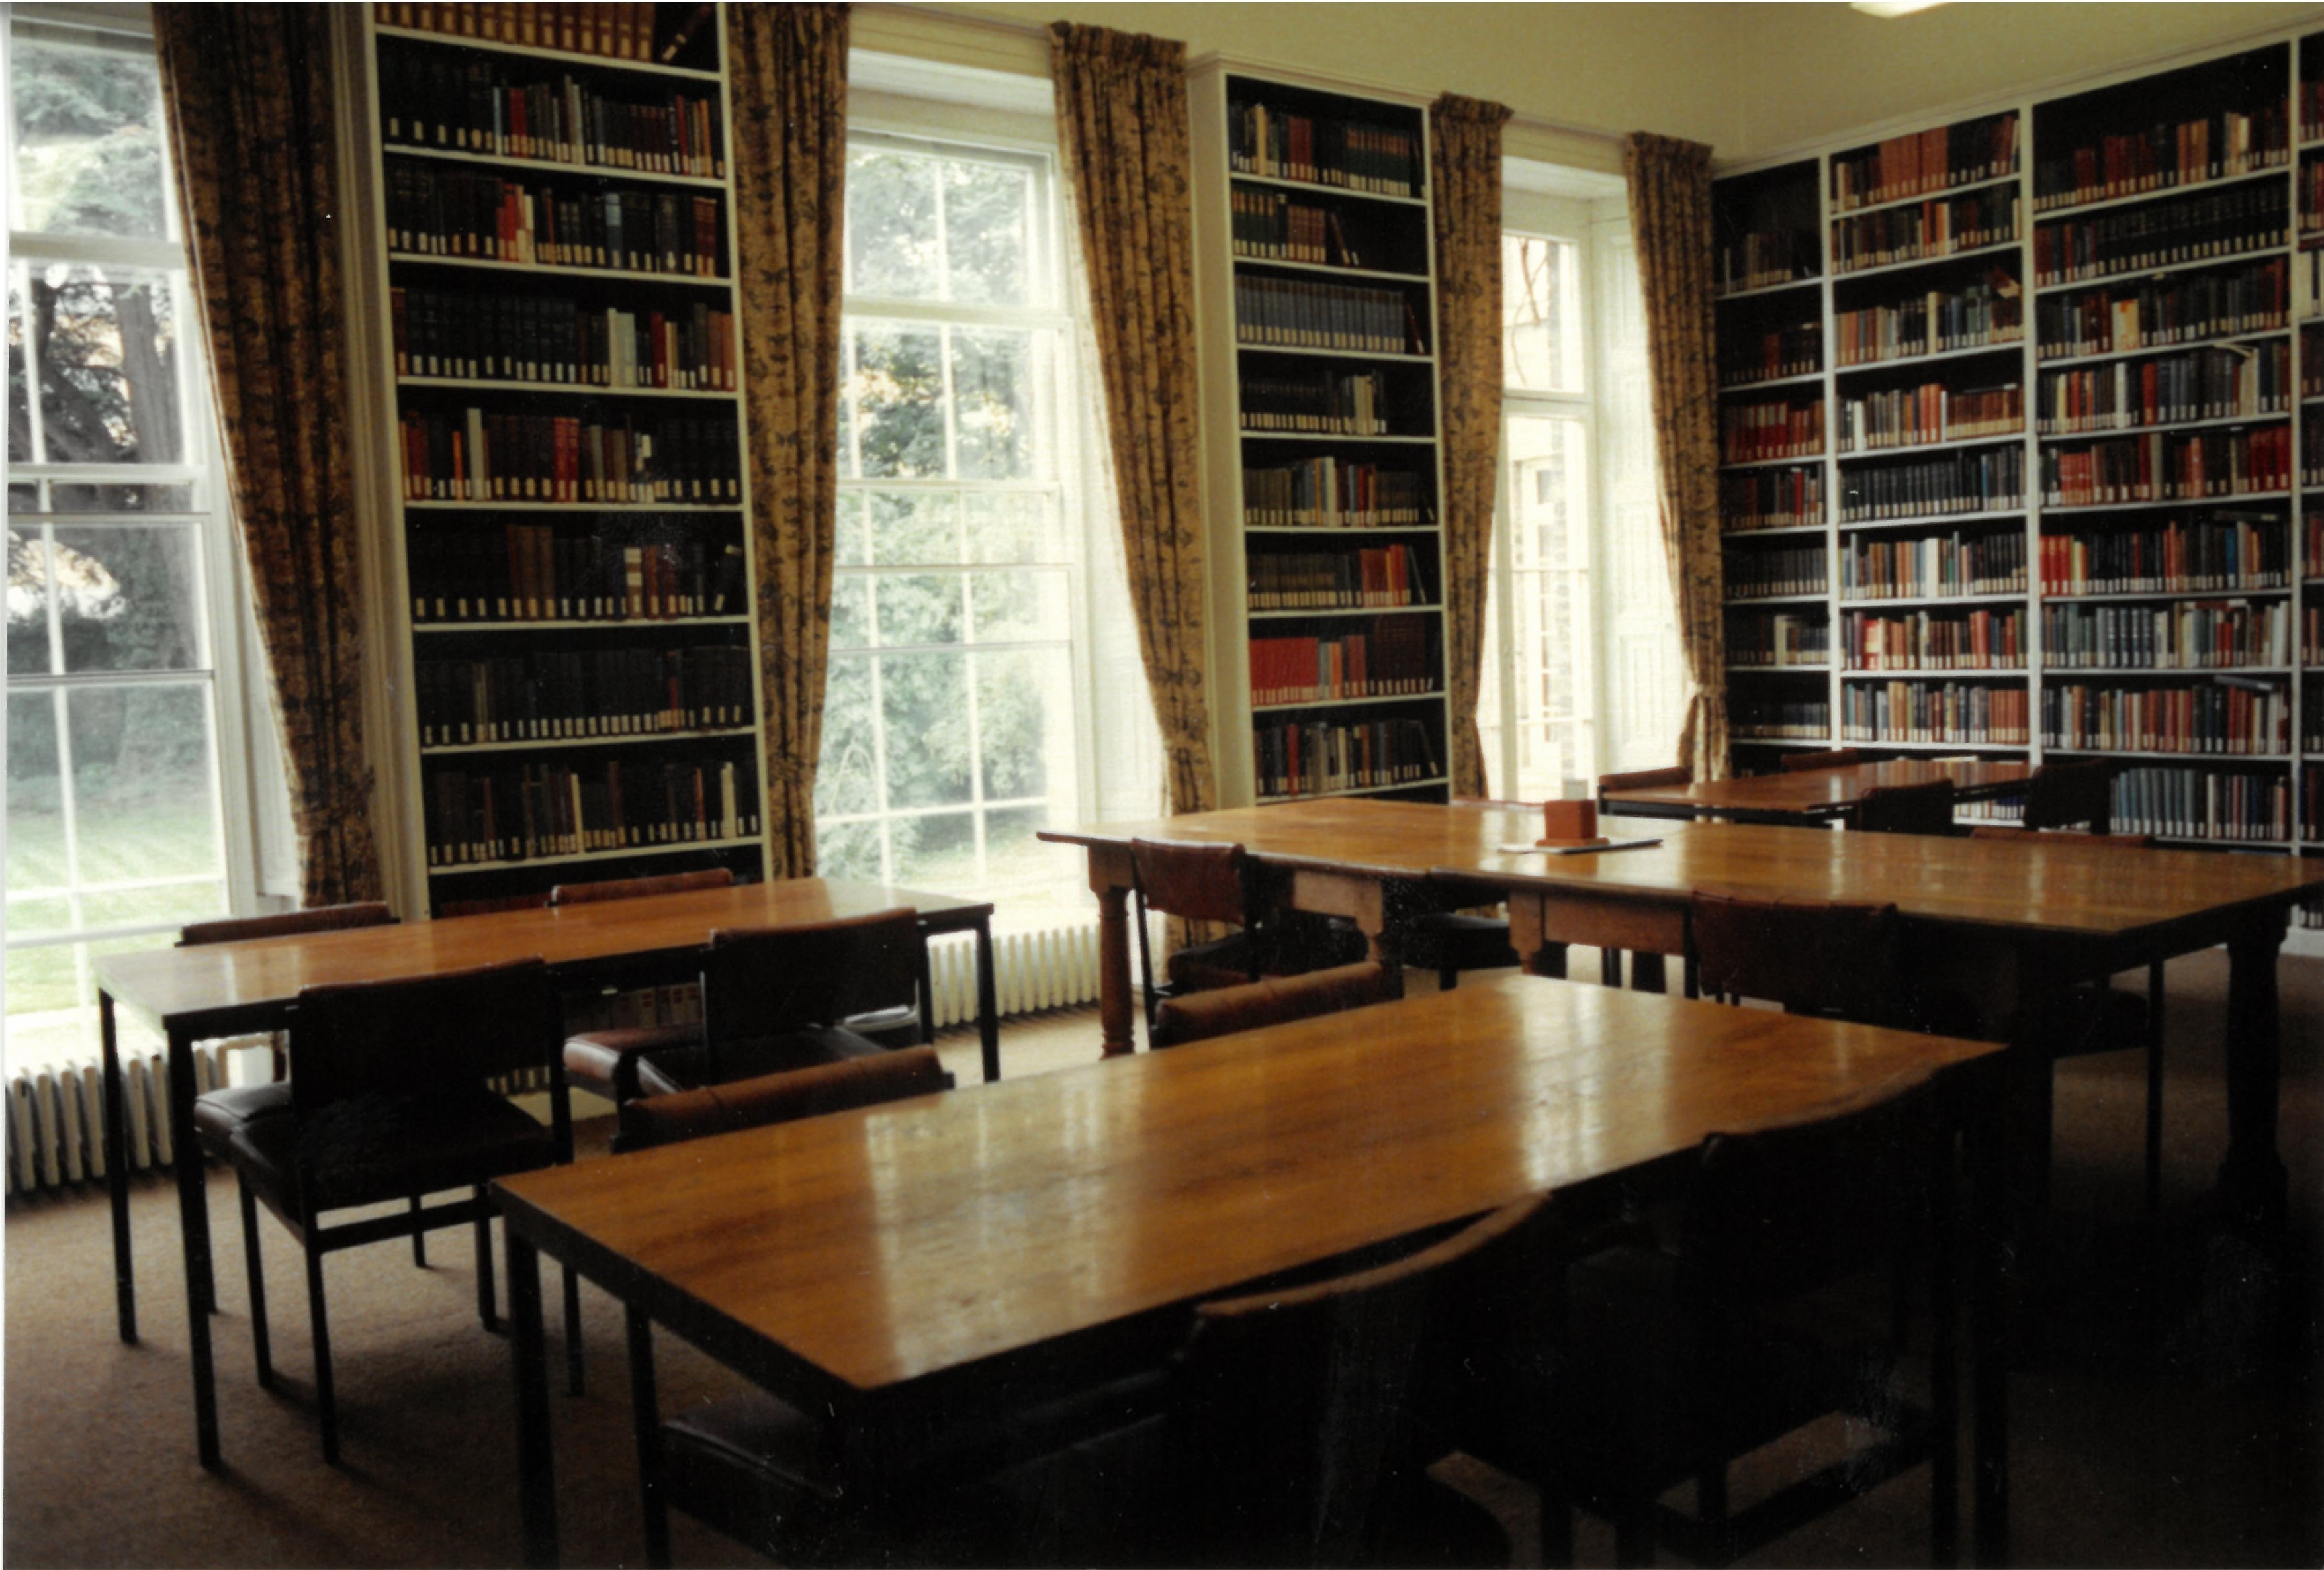 Photograph of one of the Library rooms in the East Range, c.1993